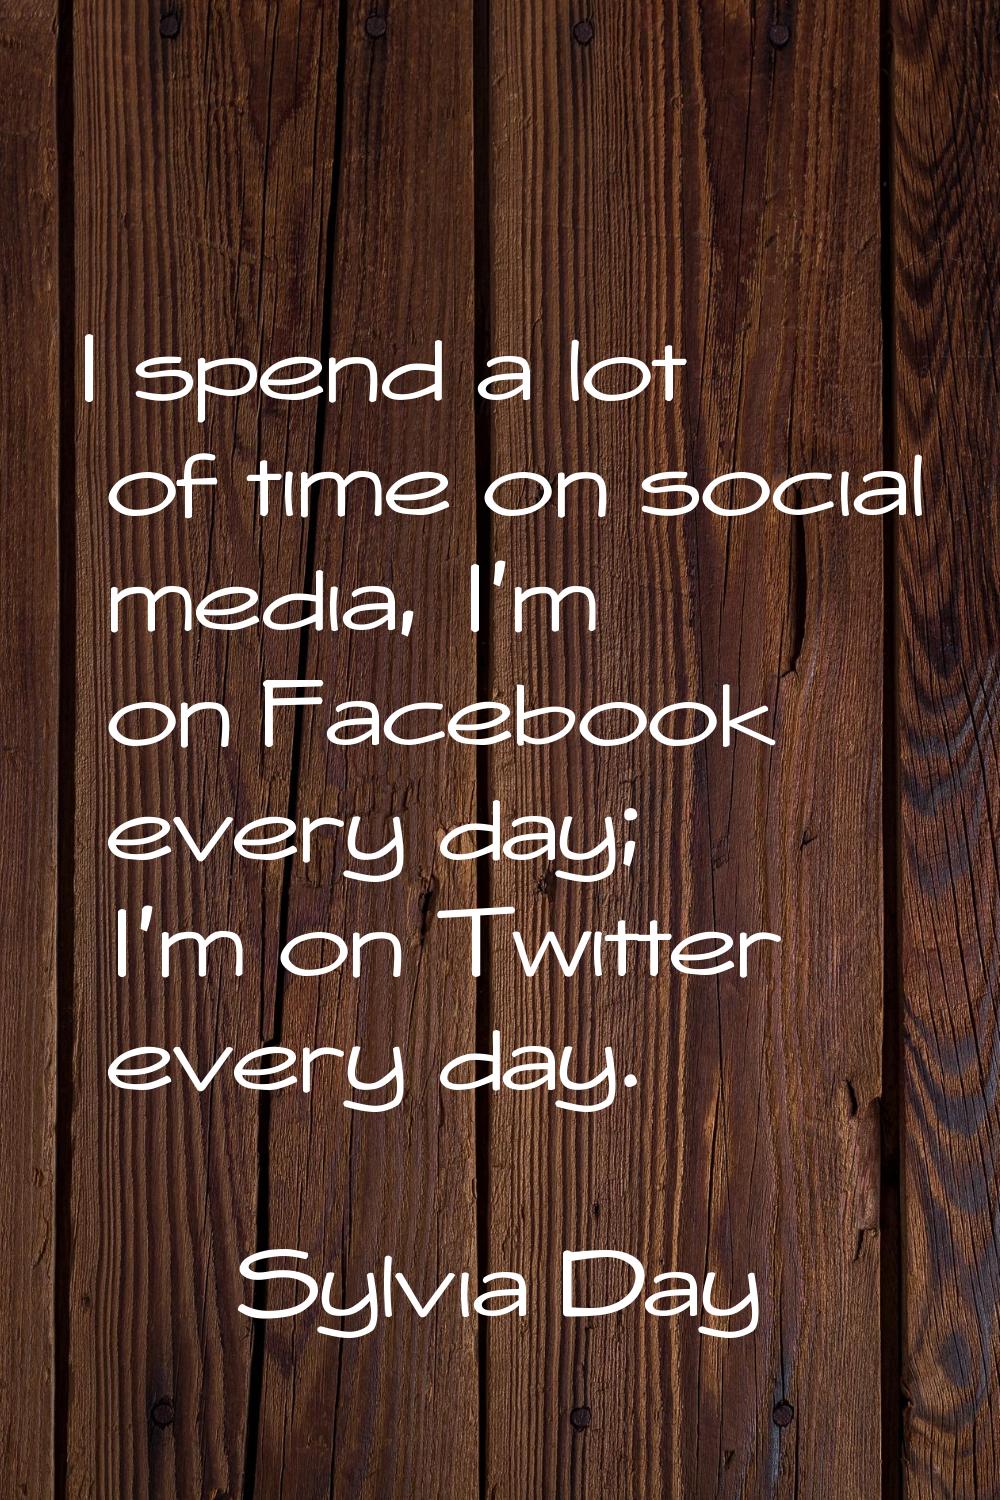 I spend a lot of time on social media, I'm on Facebook every day; I'm on Twitter every day.